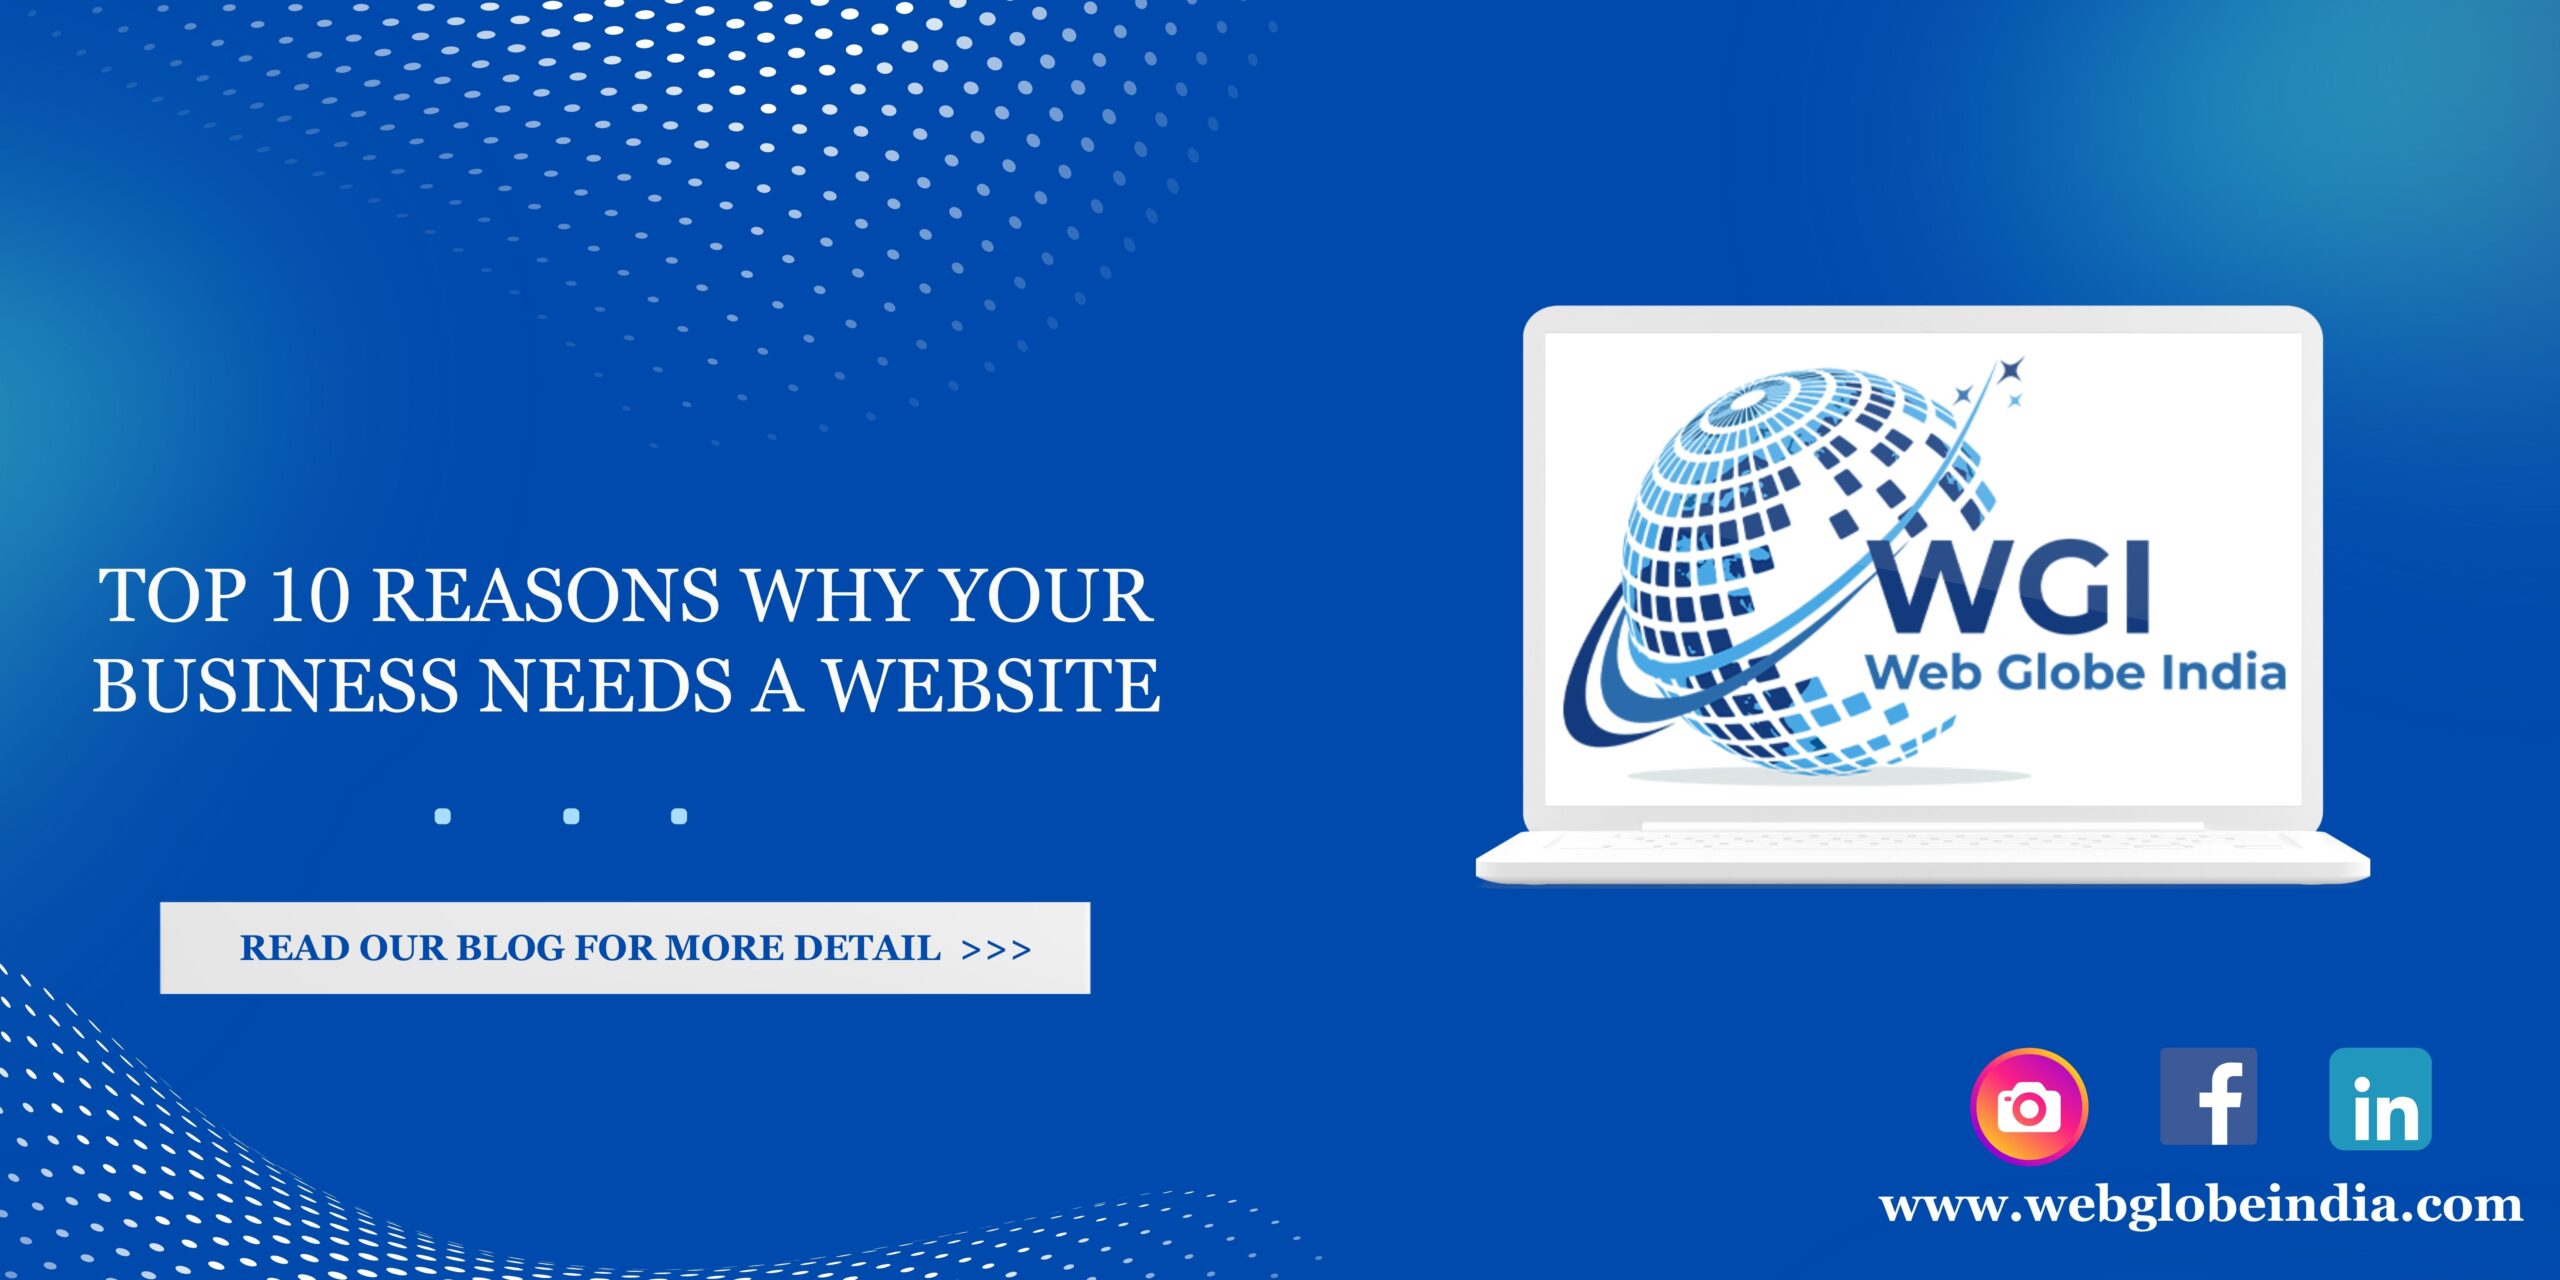 Top 10 Reasons Why Your Business needs a Website